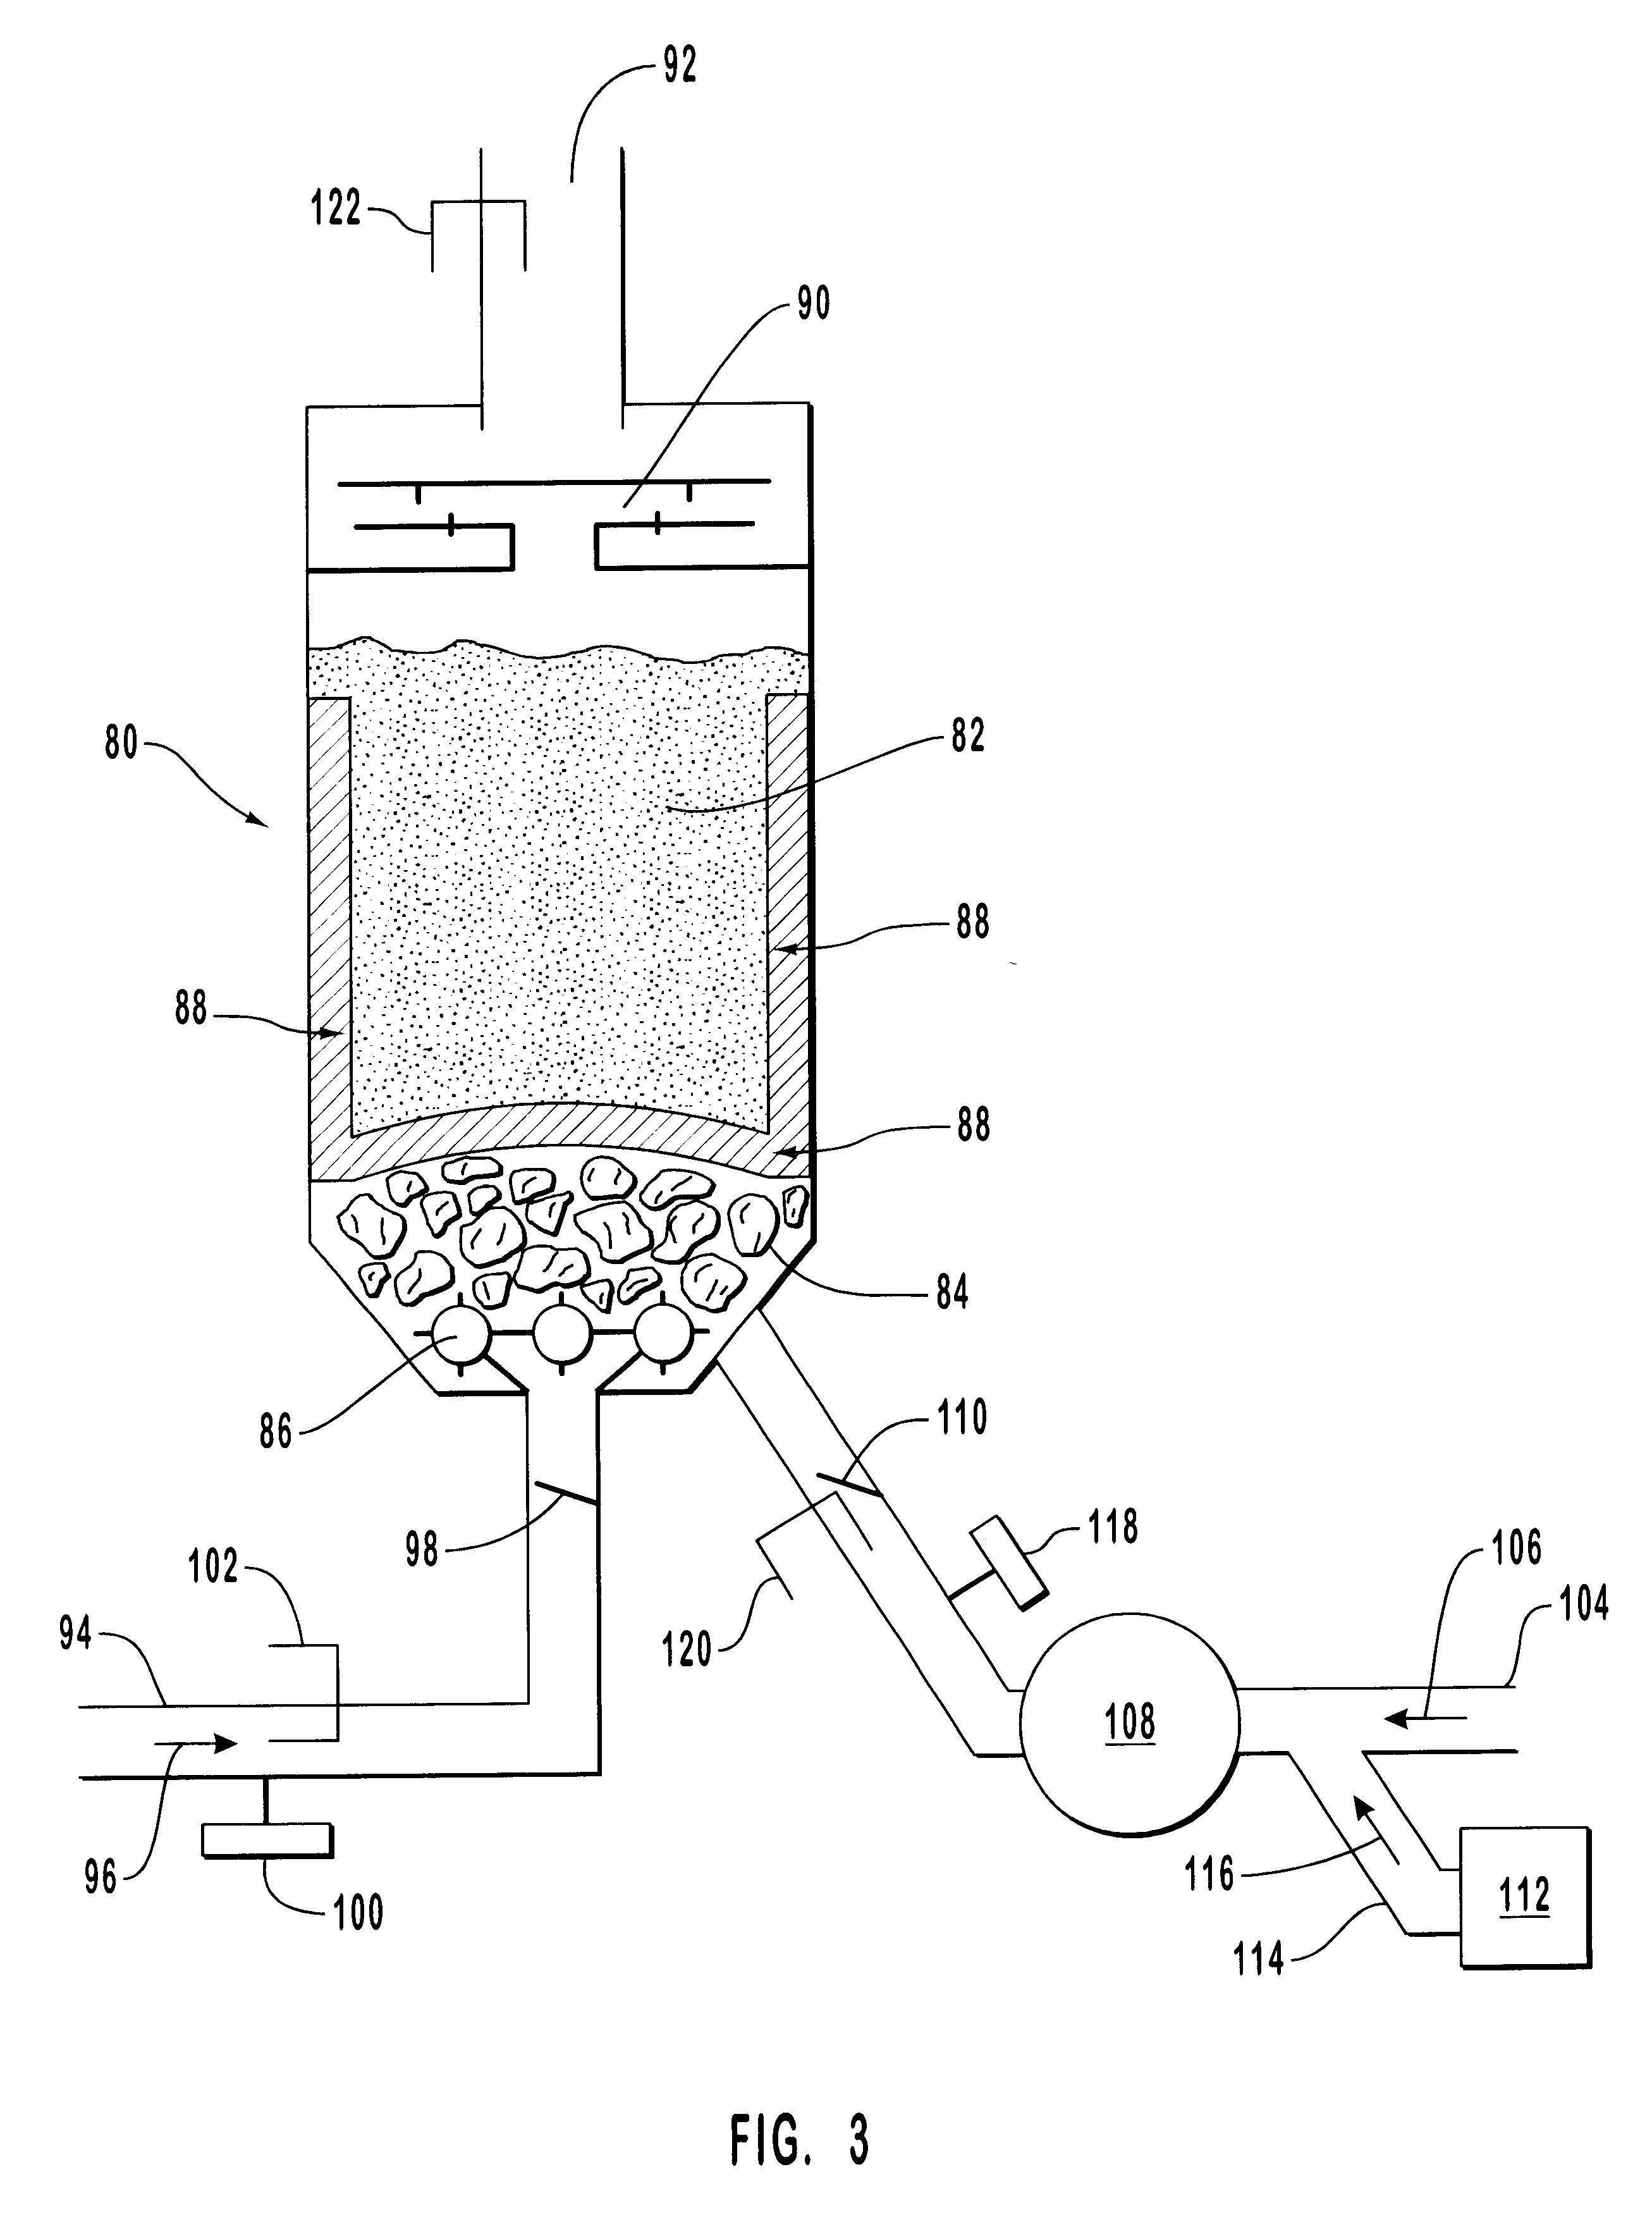 Methods and apparatus for low back pressure muffling of internal combustion engines